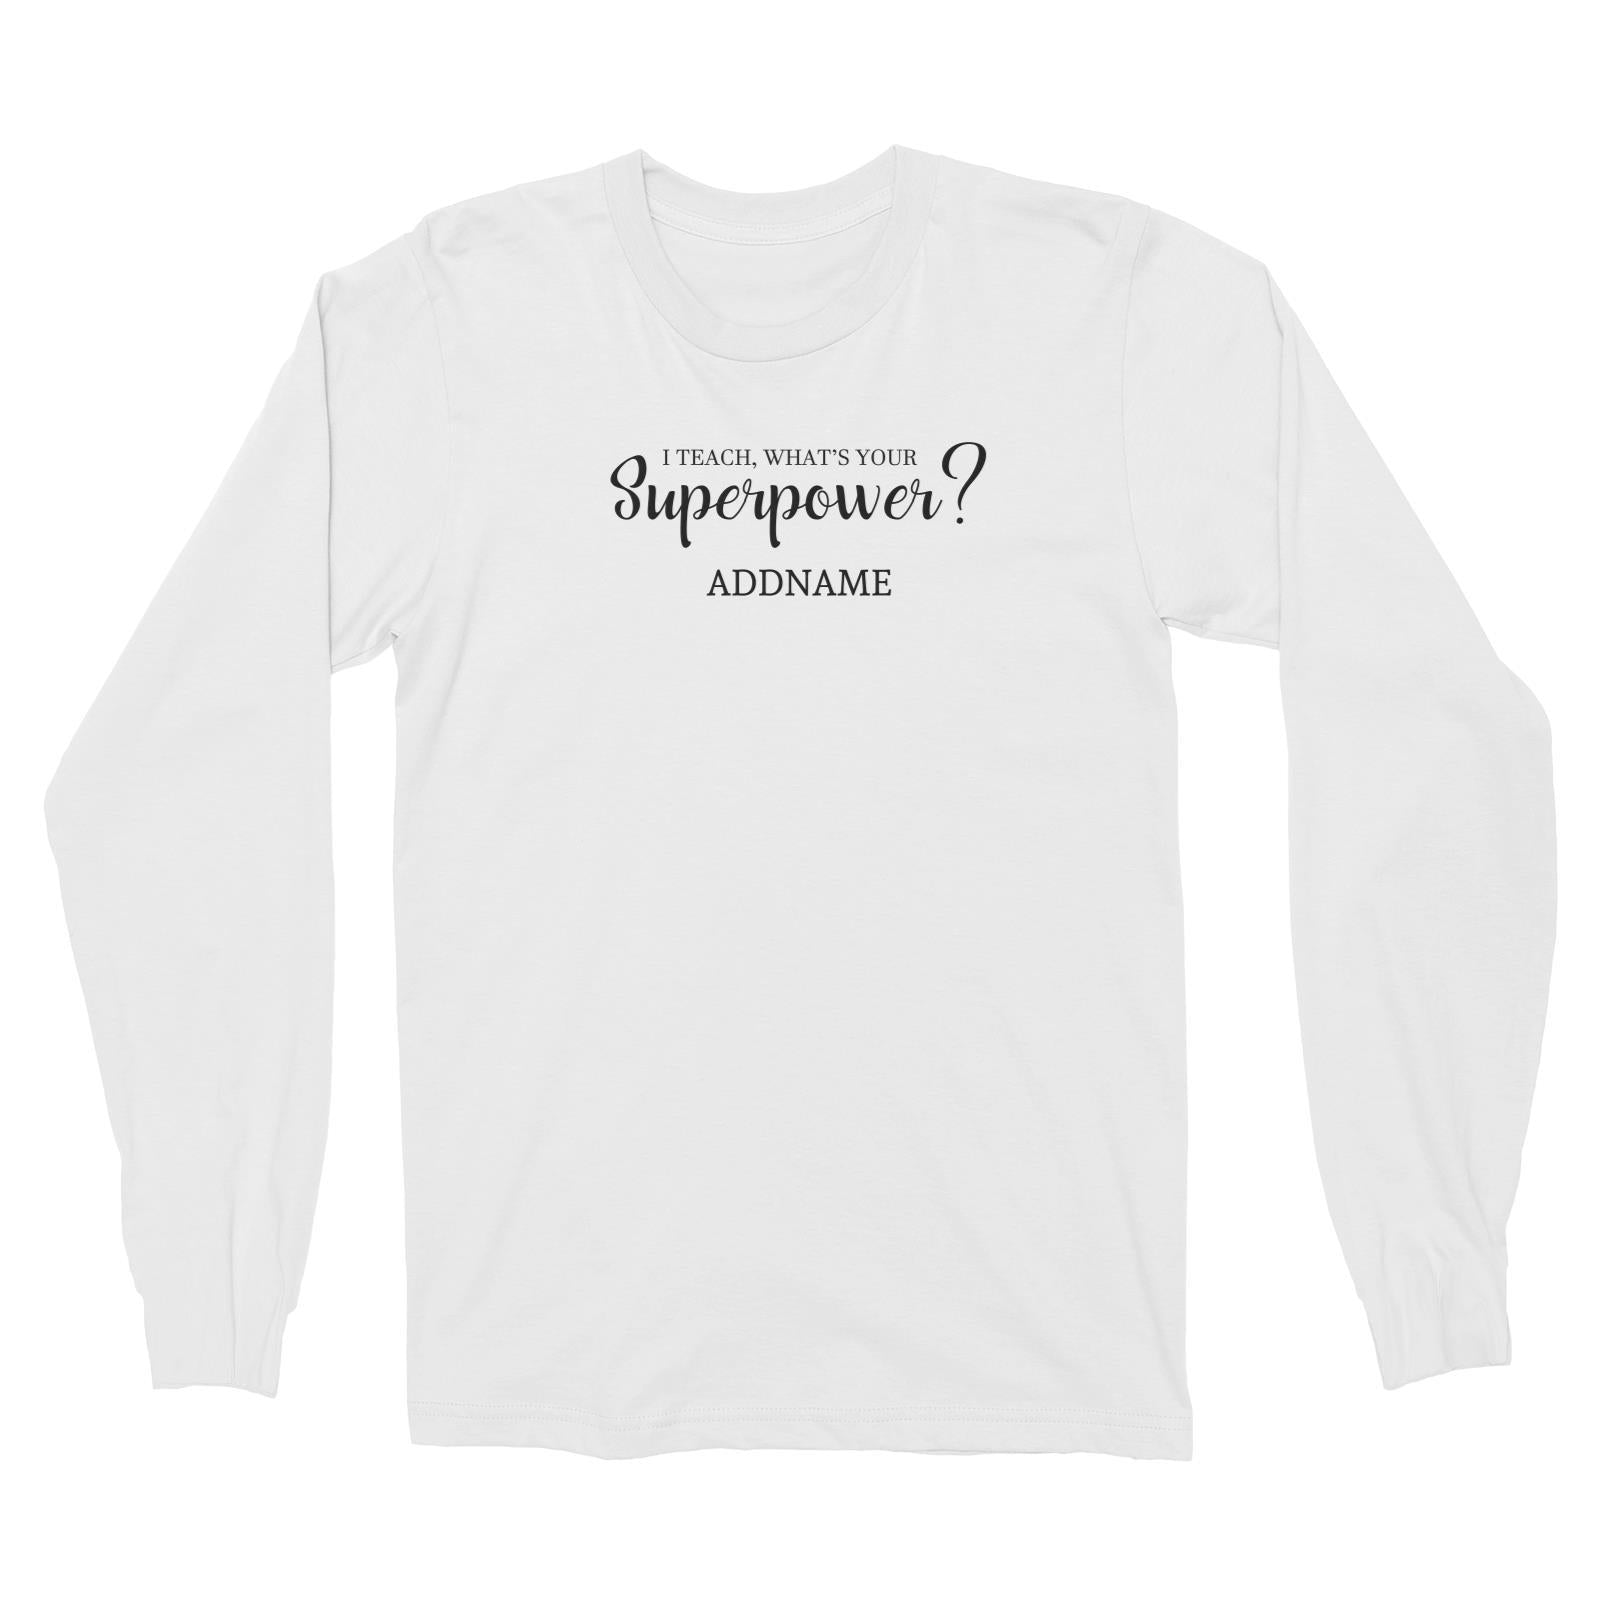 Super Teachers I Teach What's Your Superpower Addname Long Sleeve Unisex T-Shirt